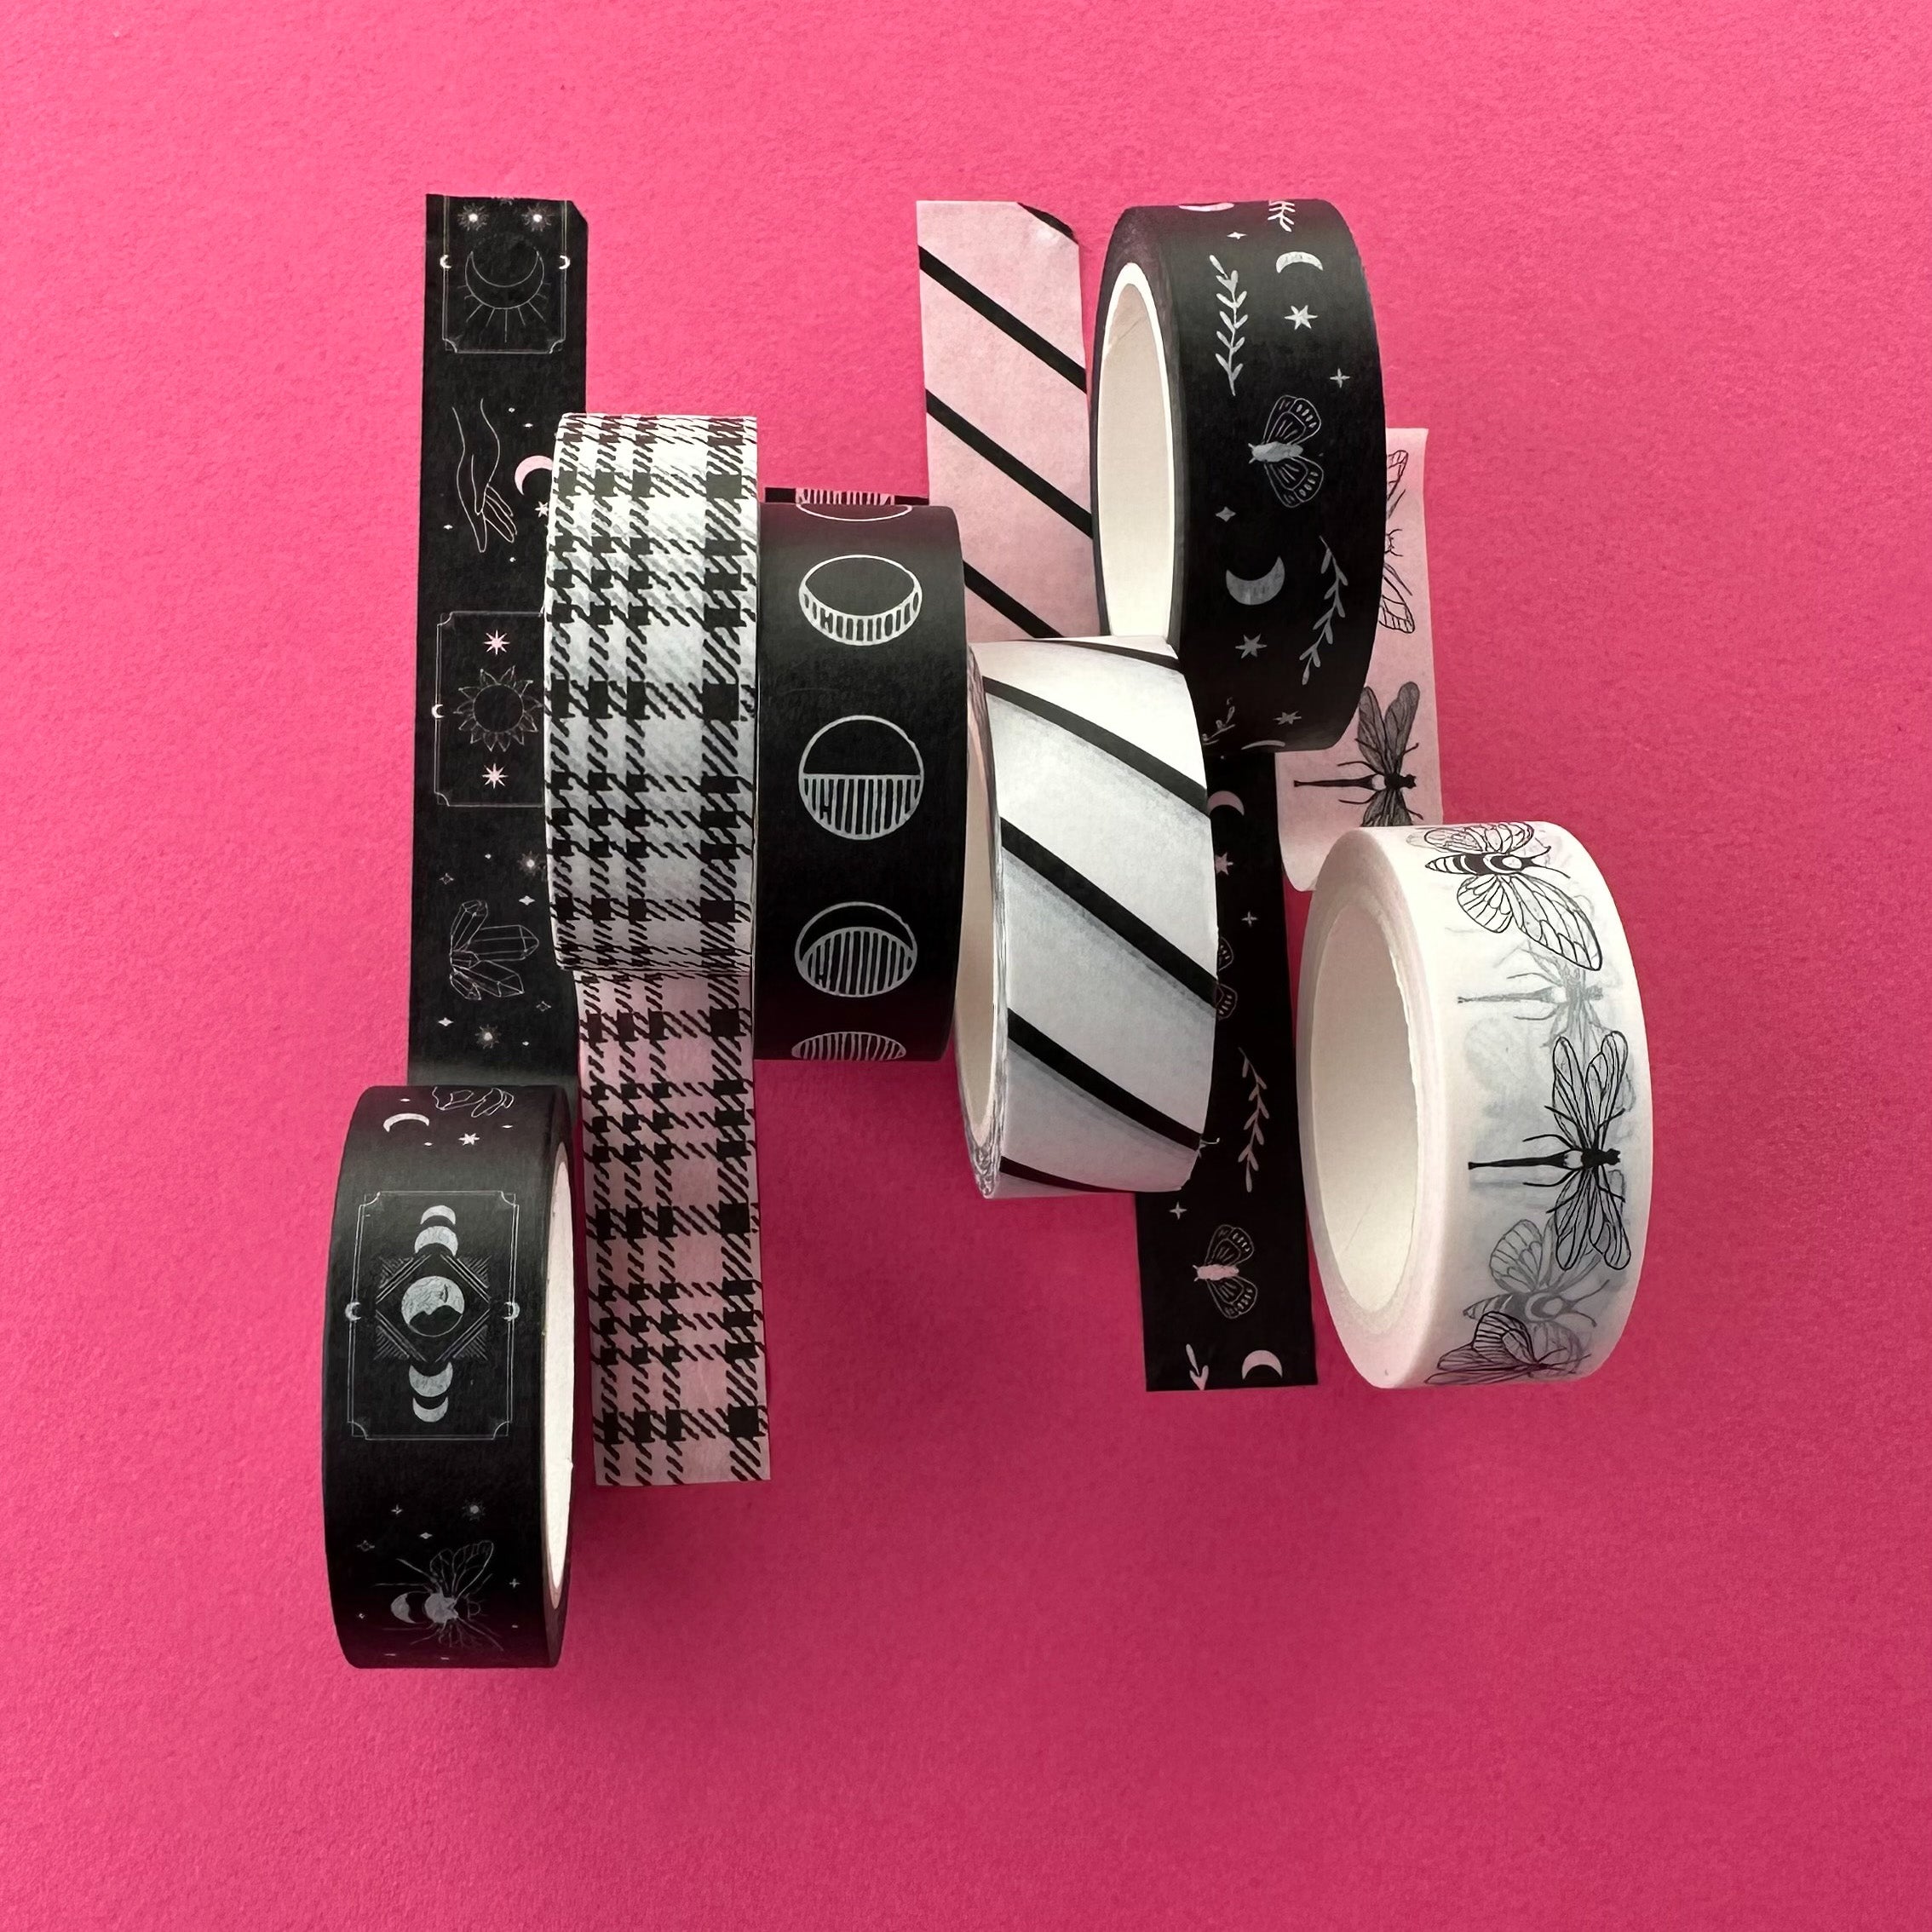 This photo is some of our black and white pattern washi tape. These beauties are perfect to adorn your planner or journal with our charming black hand-drawn heart washi tape on a vibrant pink backdrop, This tape is sold at BBB Supplies Craft Shop.